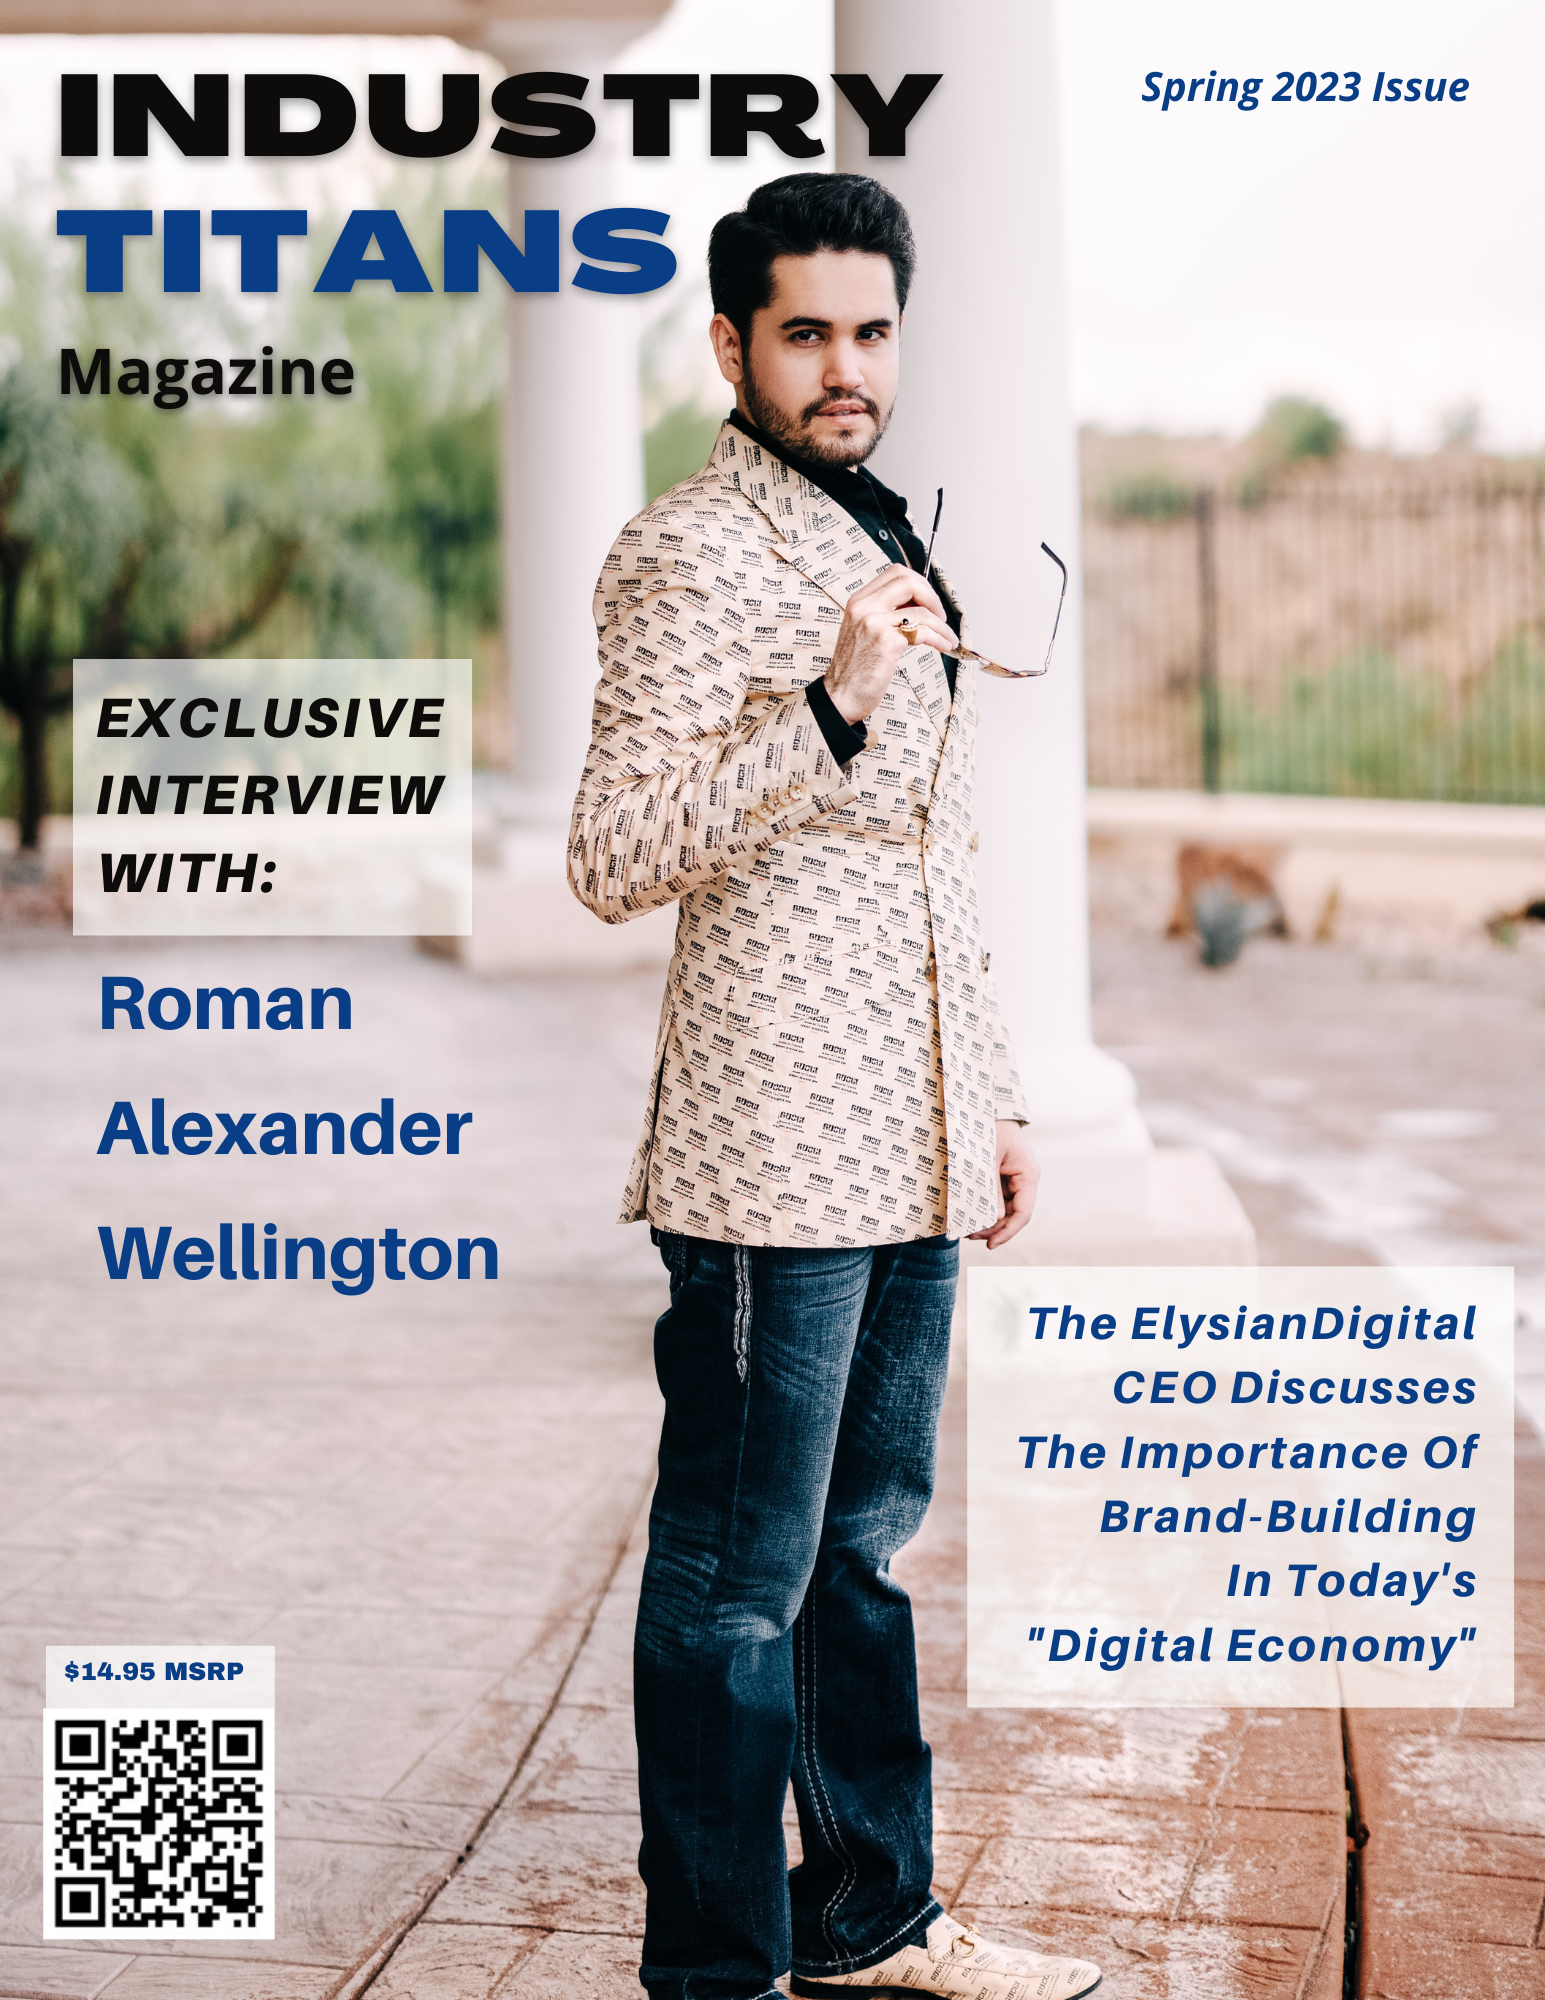 Roman Alexander Wellington On Cover Of Industry Titans Magazine Spring 2023 Issue